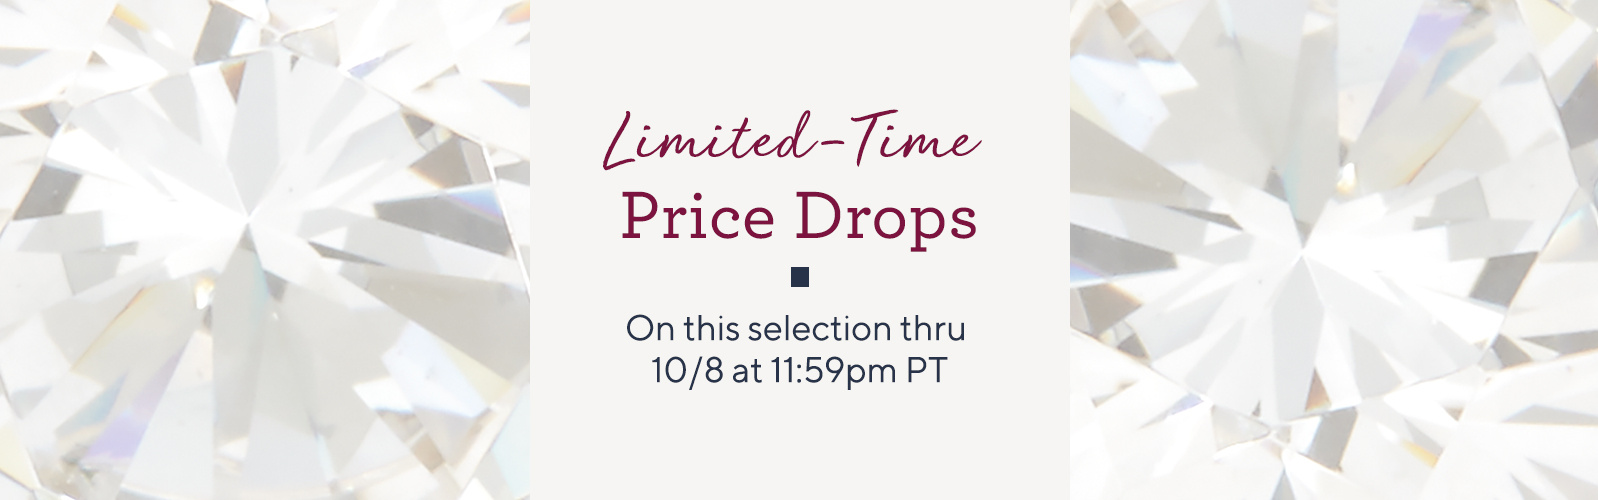 Limited-Time Price Drops  On this selection thru 10/8 at 11:59pm PT